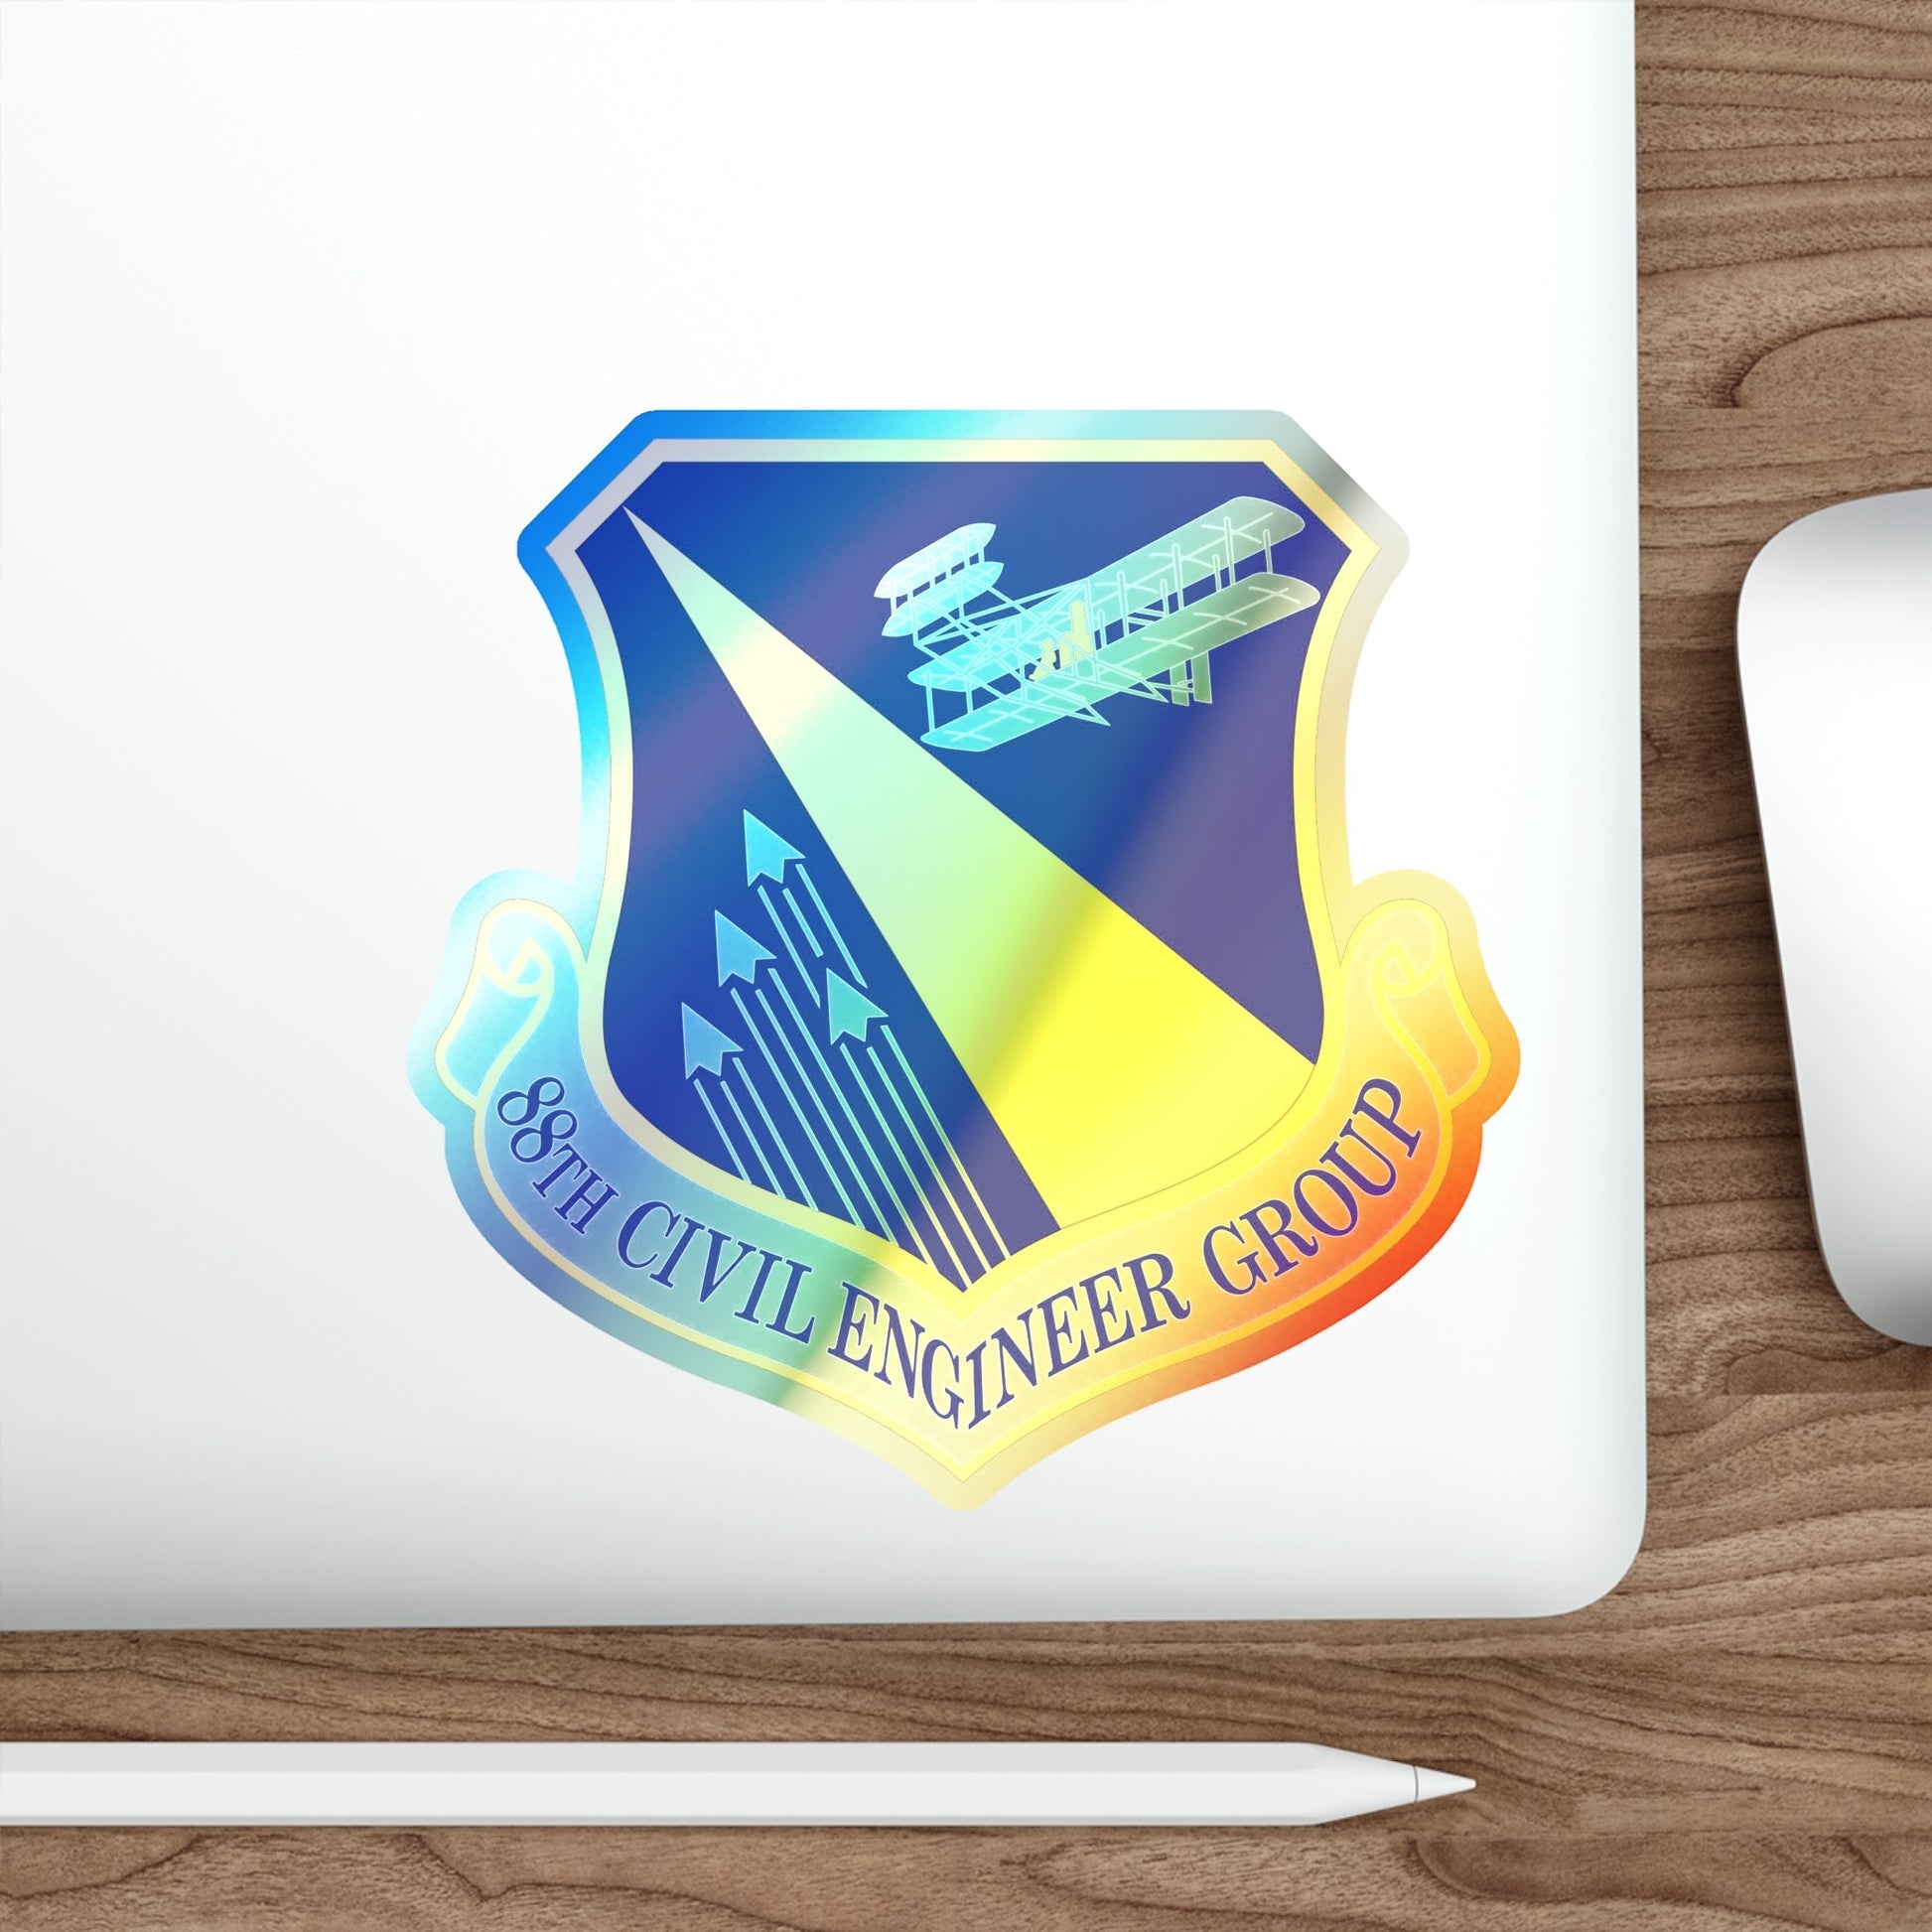 88 Civil Engineer Group AFMC (U.S. Air Force) Holographic STICKER Die-Cut Vinyl Decal-The Sticker Space